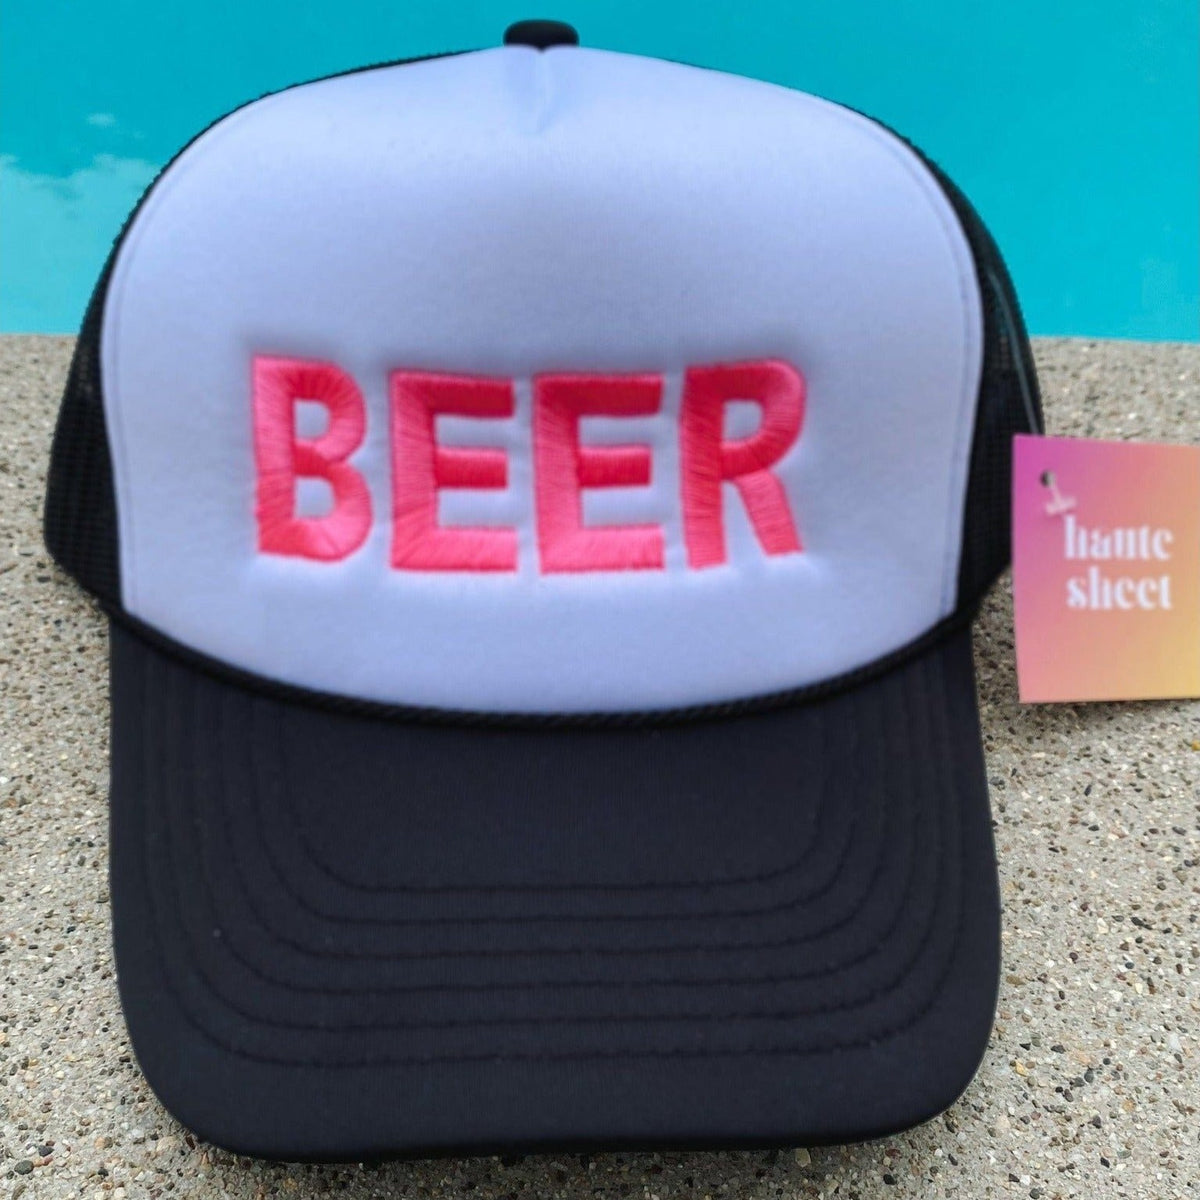 BEER Embroidered | Black and Pink White Trucker Hat by Haute Sheet Hats TheFringeCultureCollective